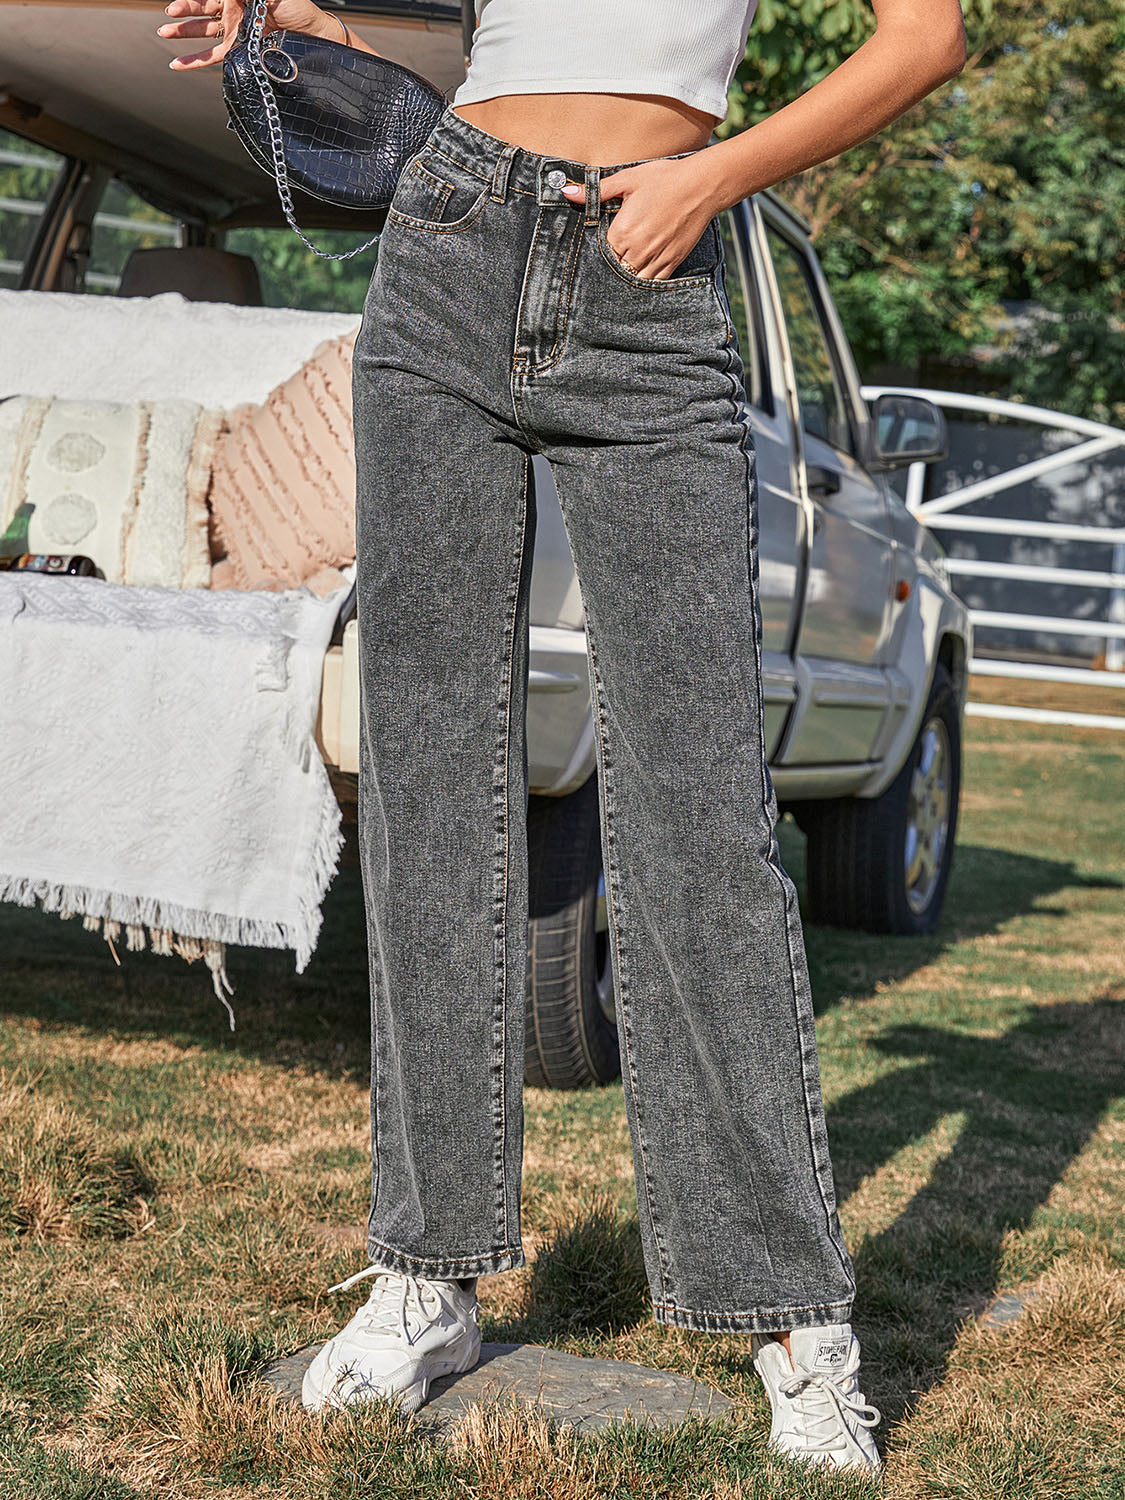 Women's Bottoms - Shop the Latest Styles at Lifestyle Basics